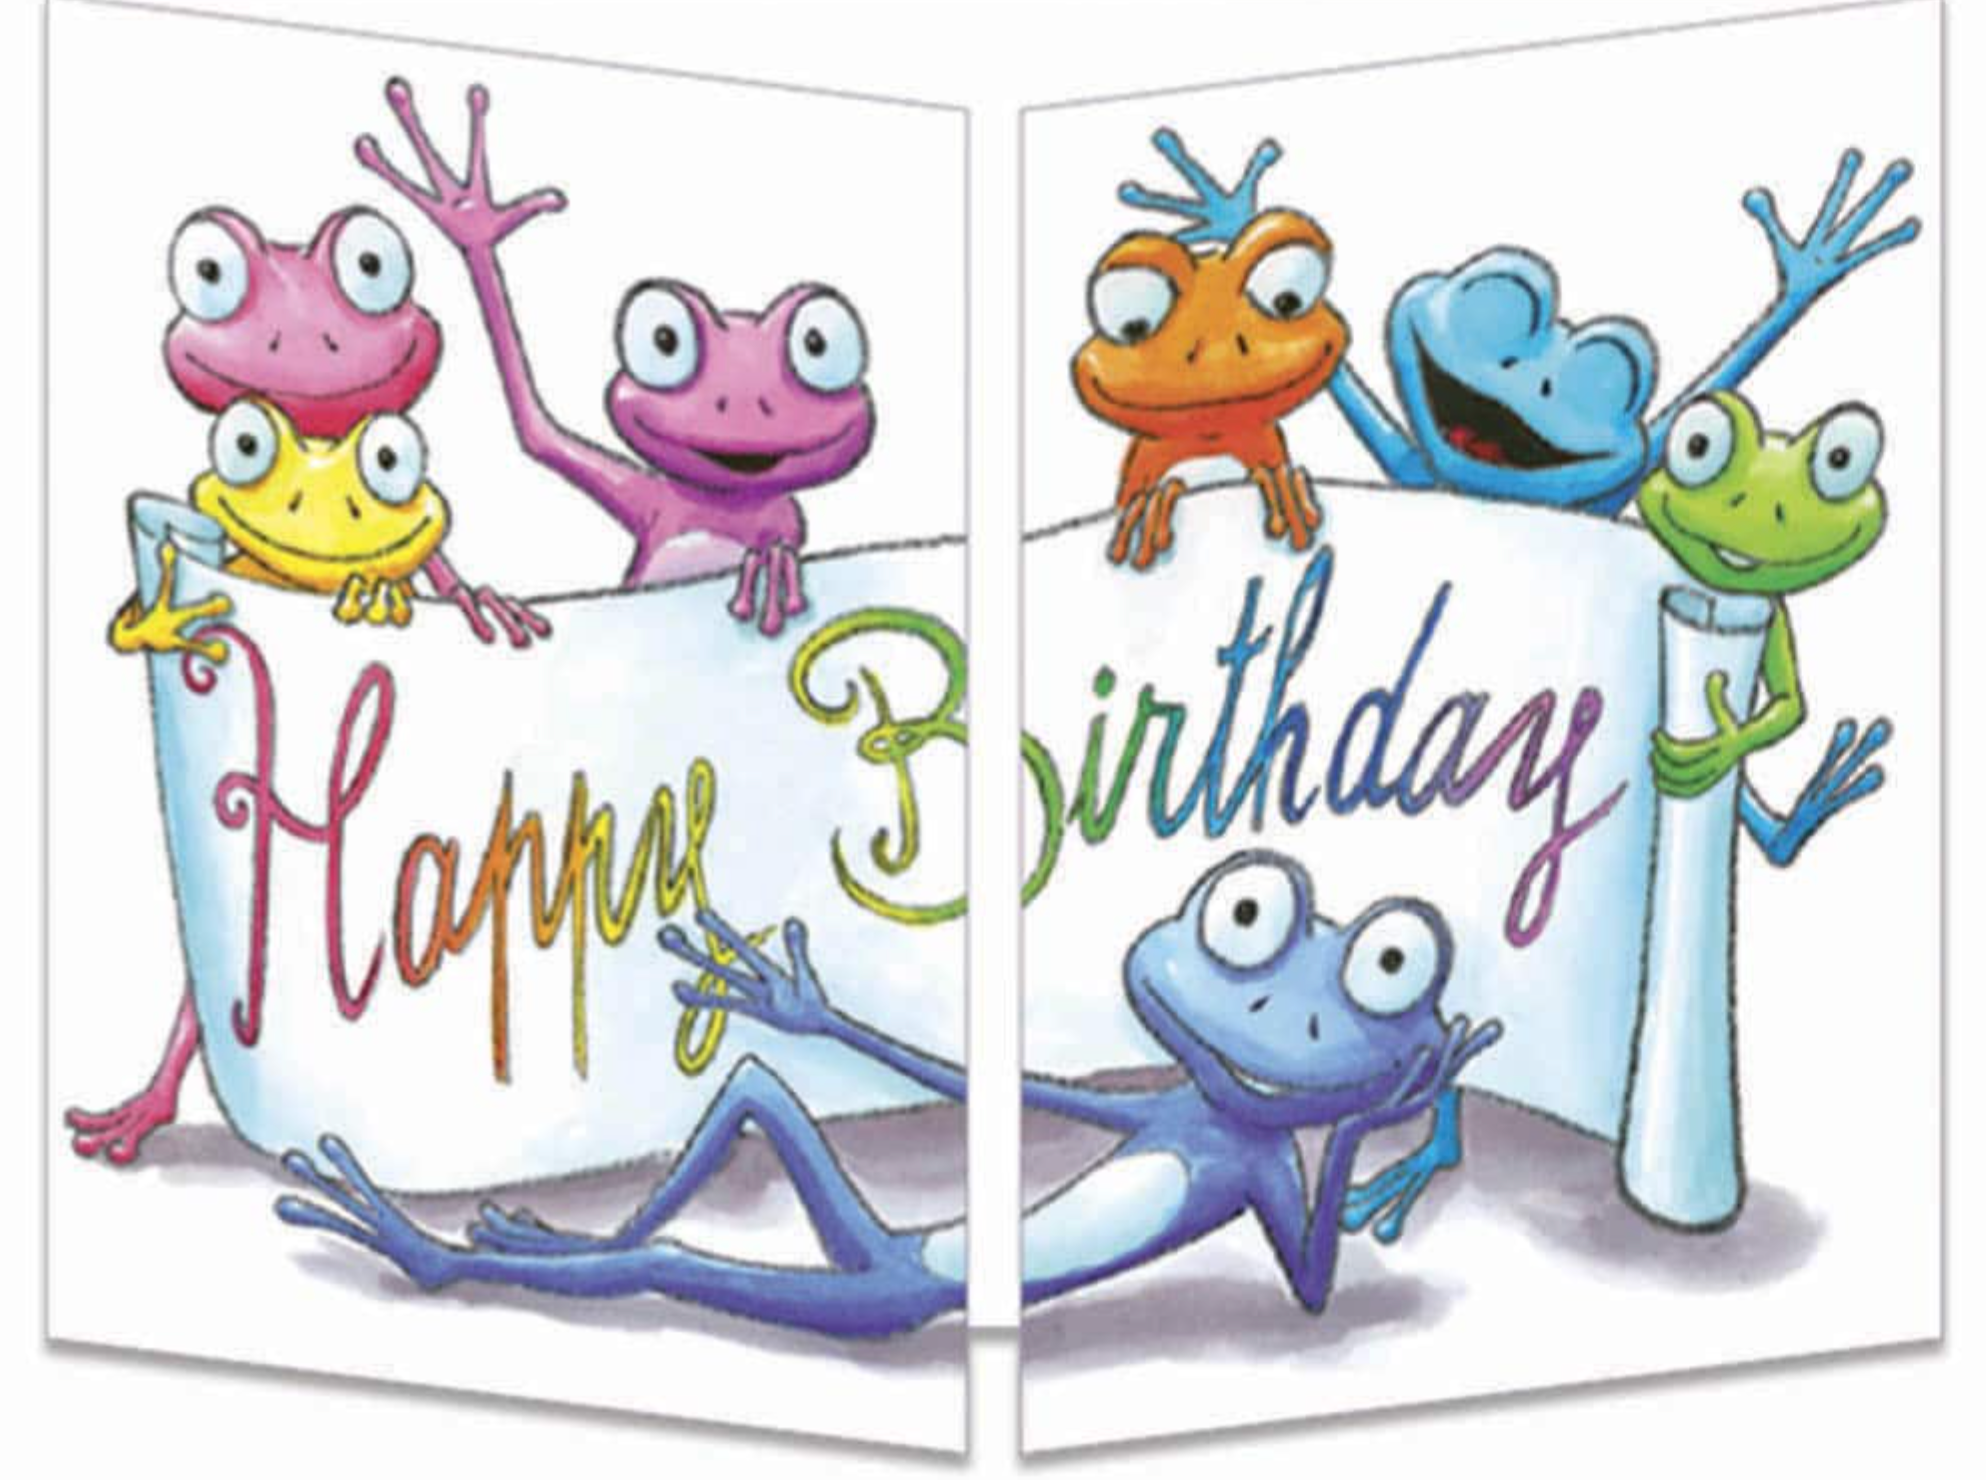 Sophie Turrel Folding Greetings Card - Frogs CT327